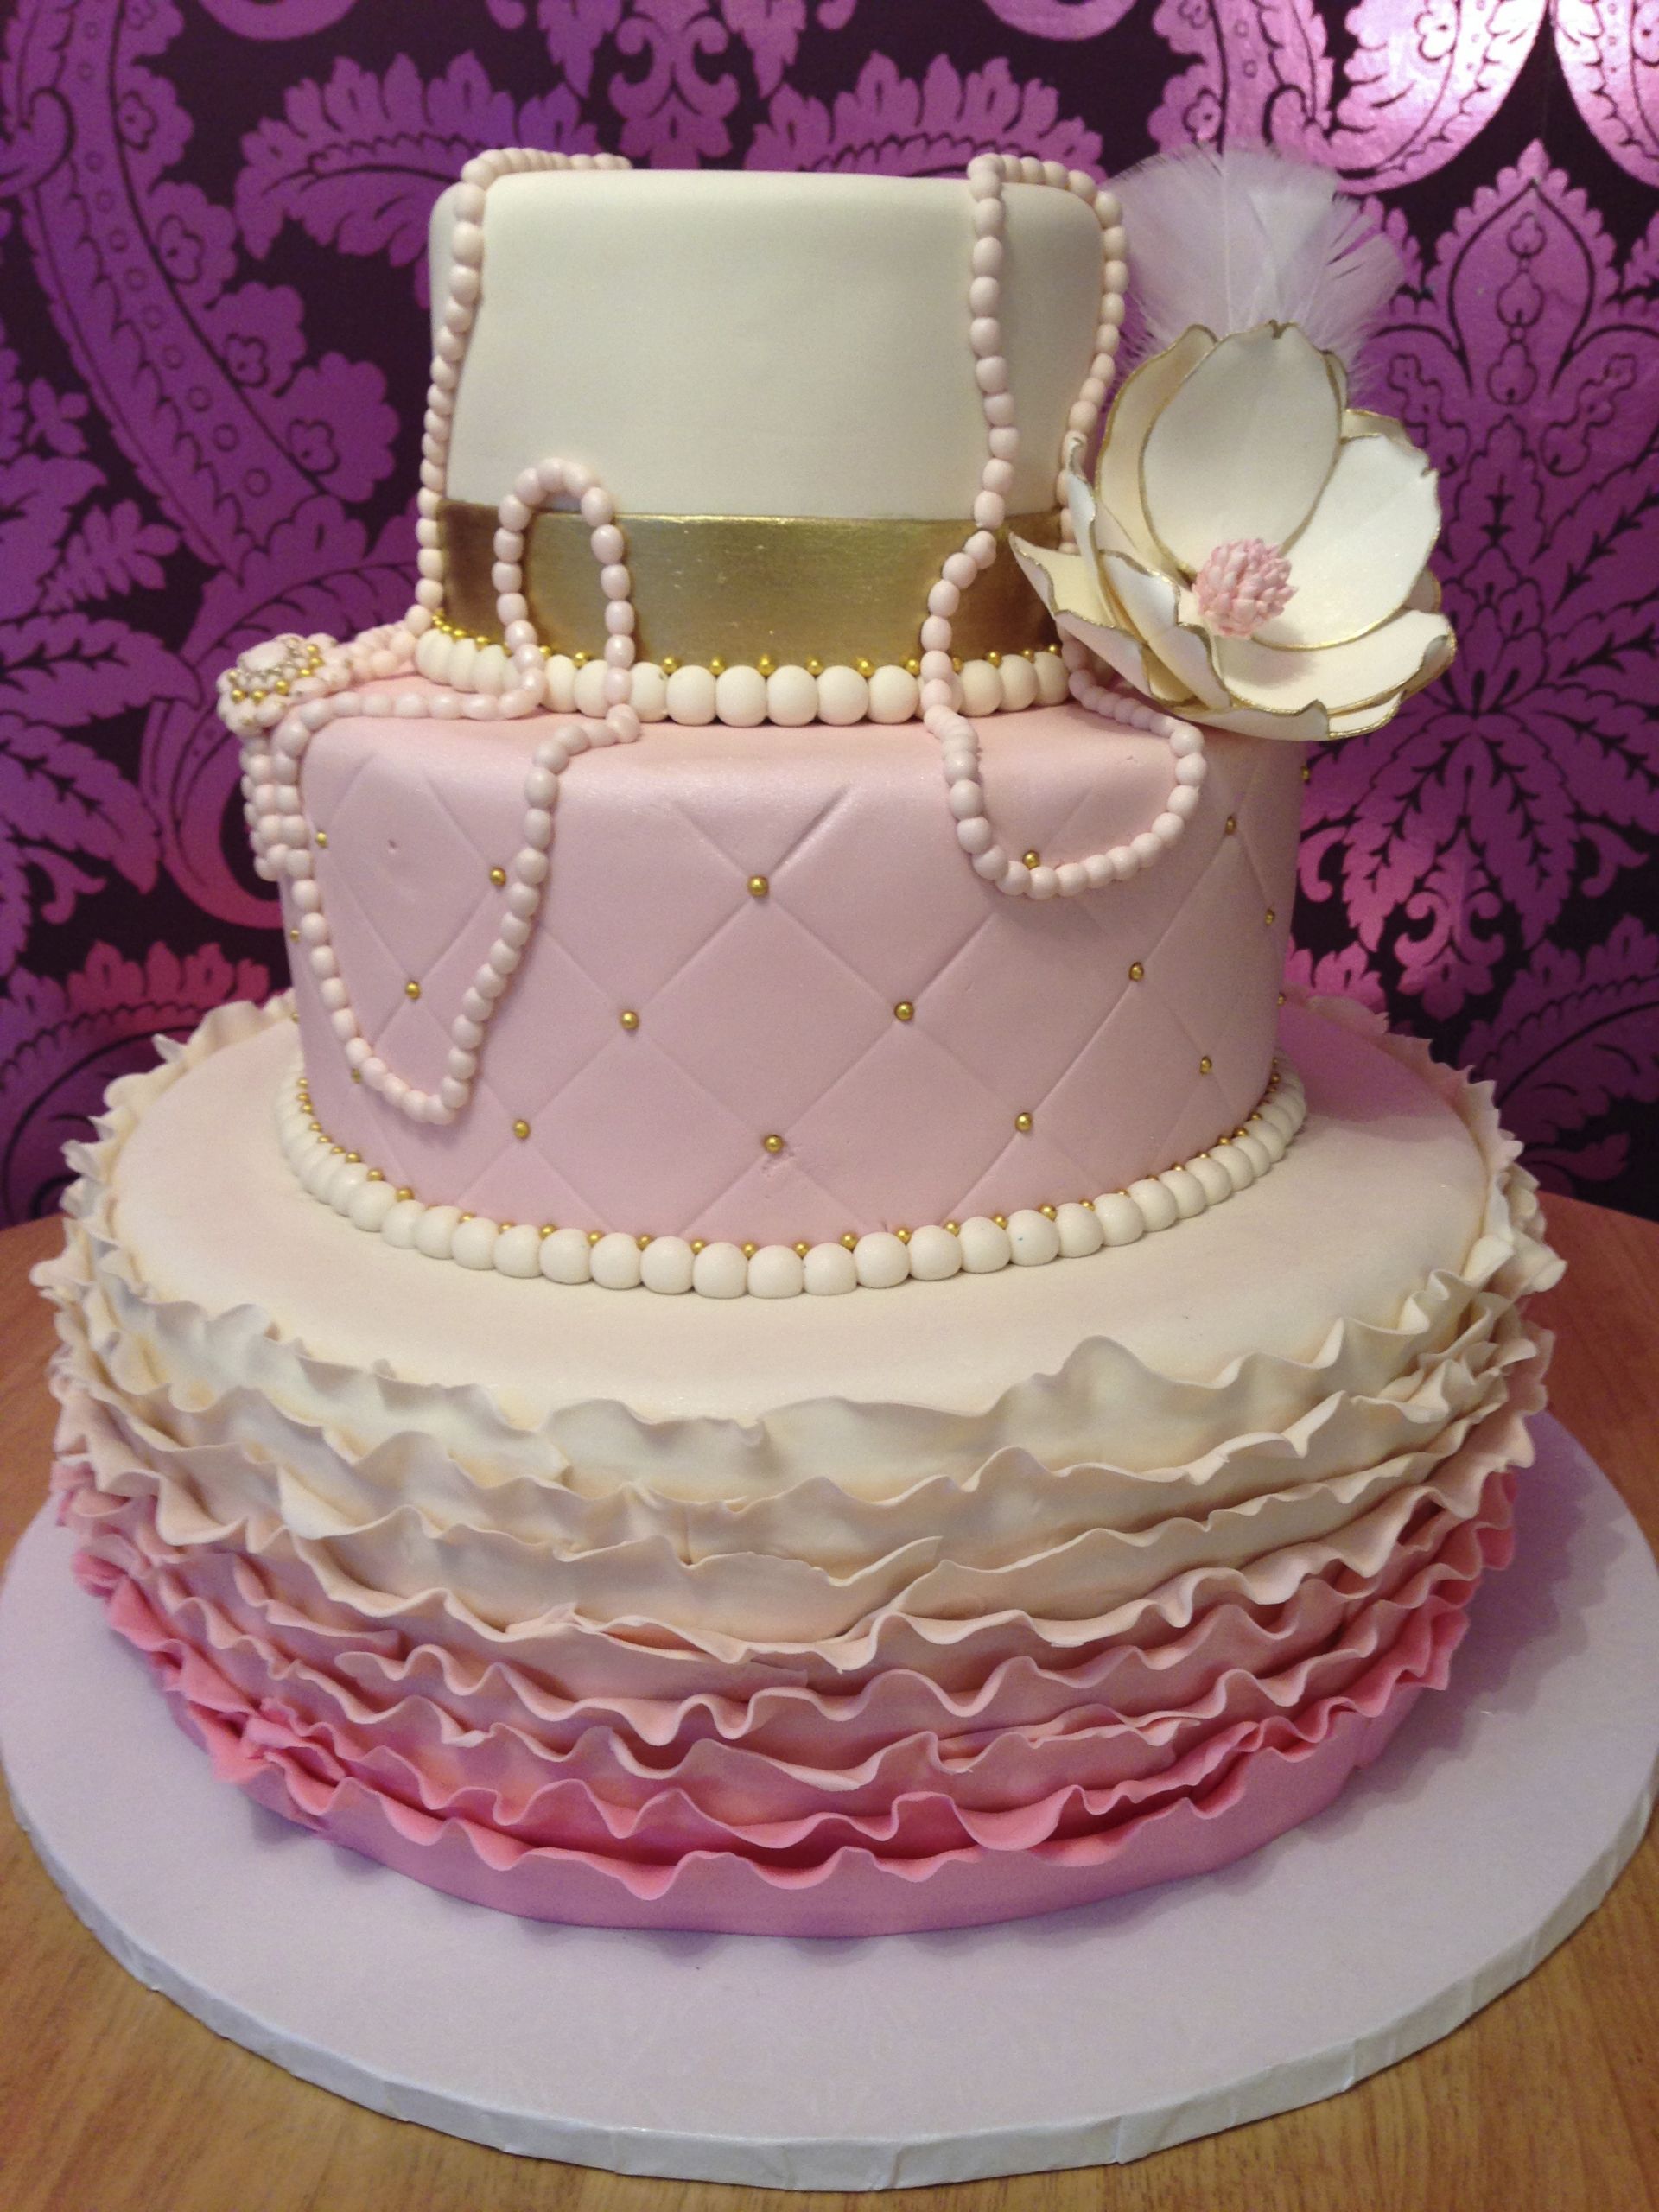 Images Of A Birthday Cake
 Birthday Cakes – The Cake Boutique